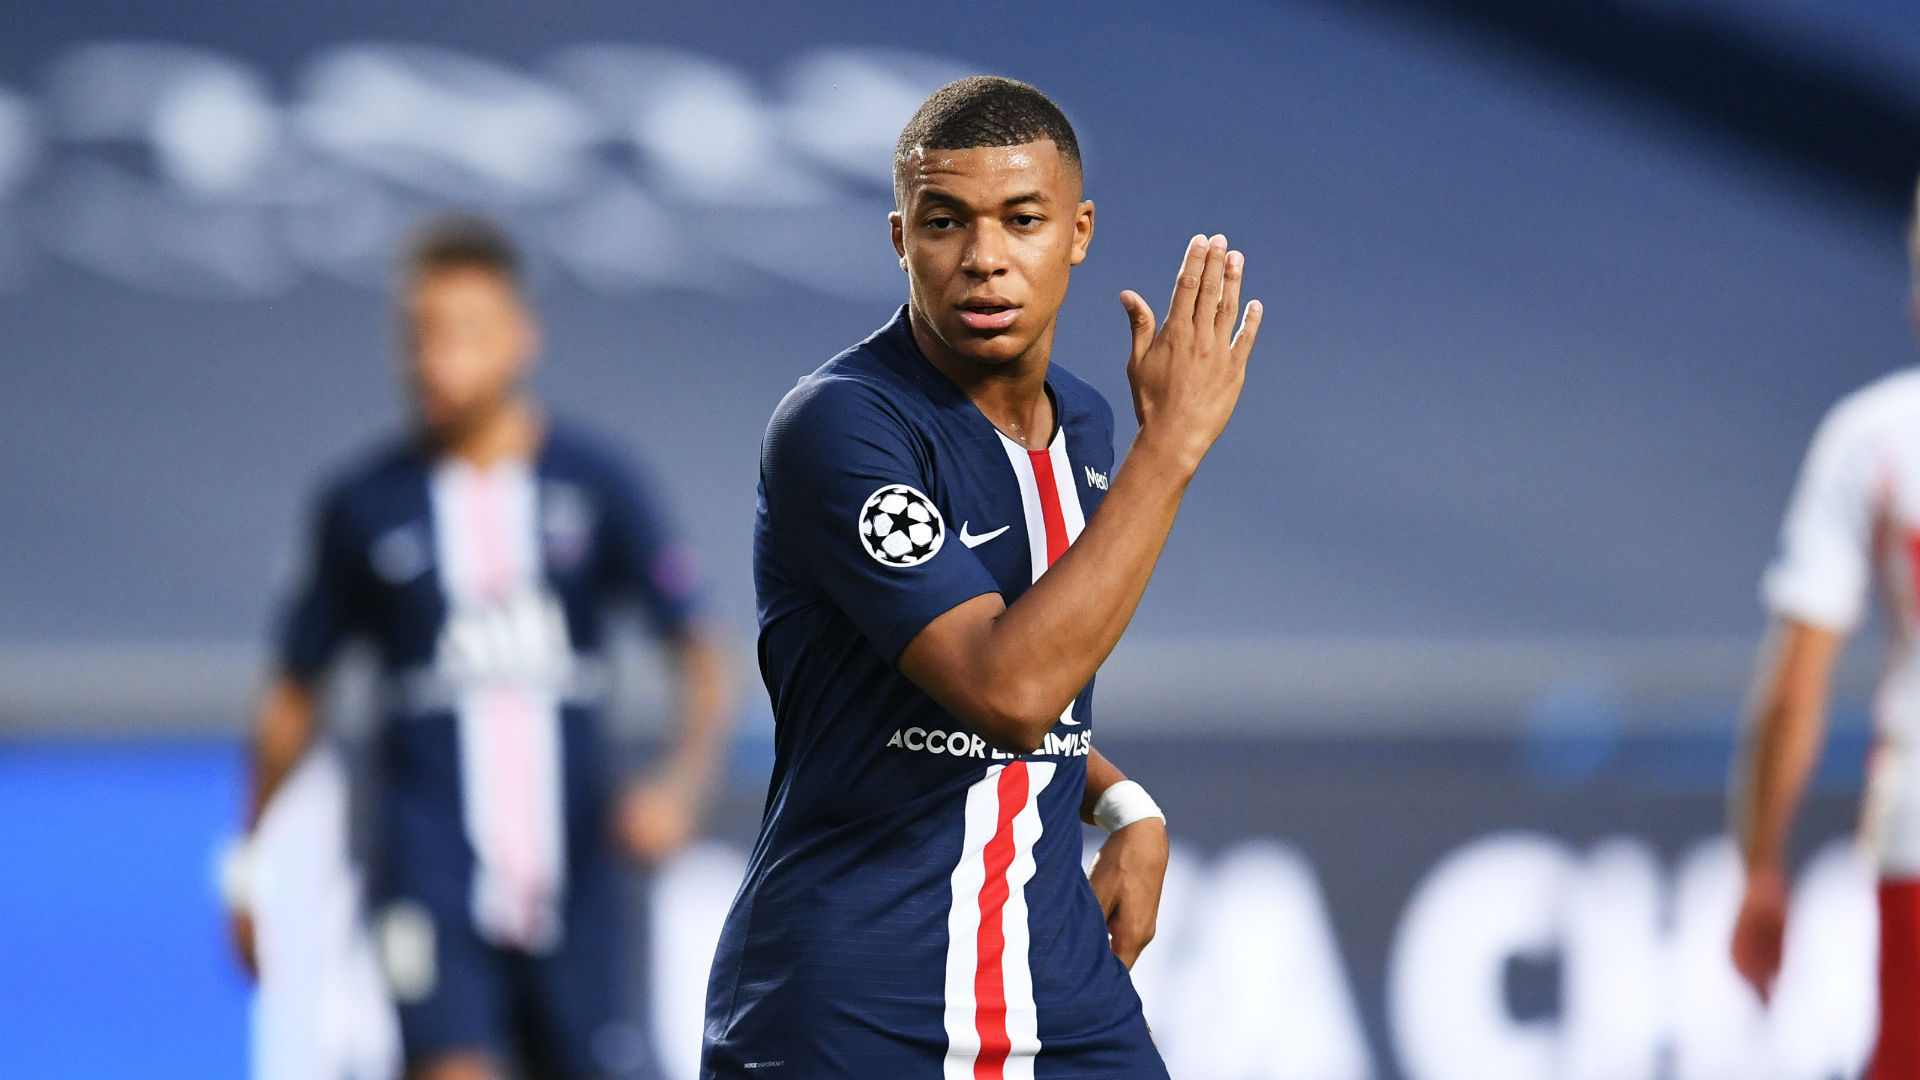 Real Madrid could be ready to land Paris Saint-Germain star Kylian Mbappe next year.